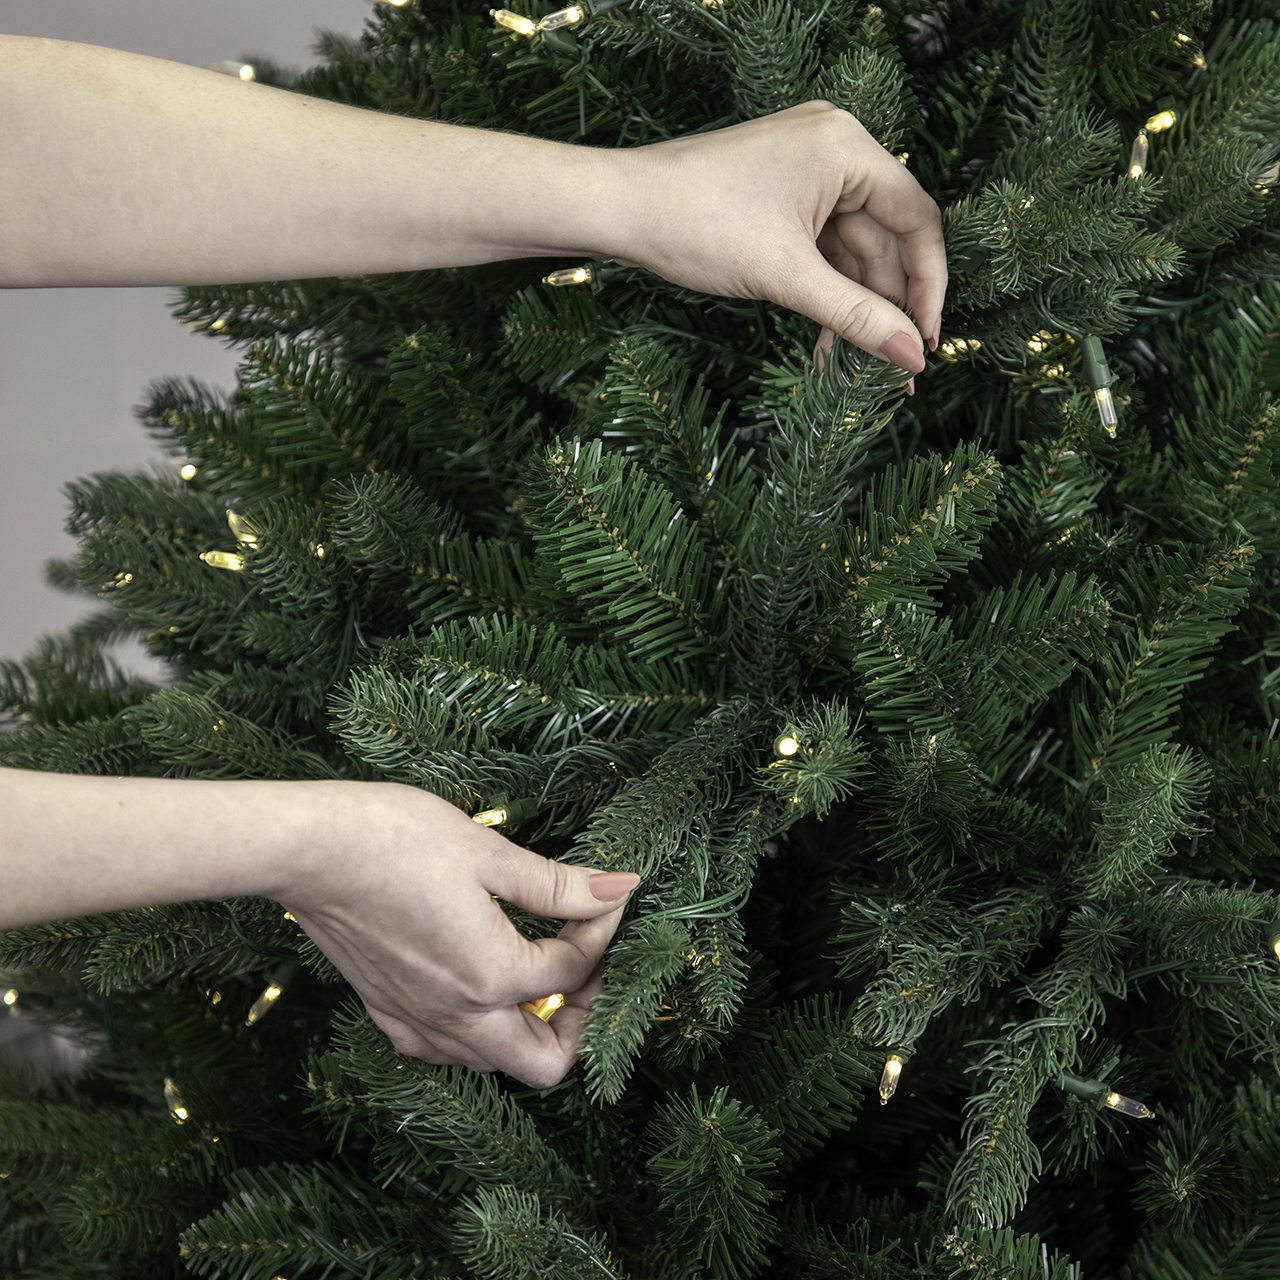 hands pulling apart branches of Christmas tree for fullness